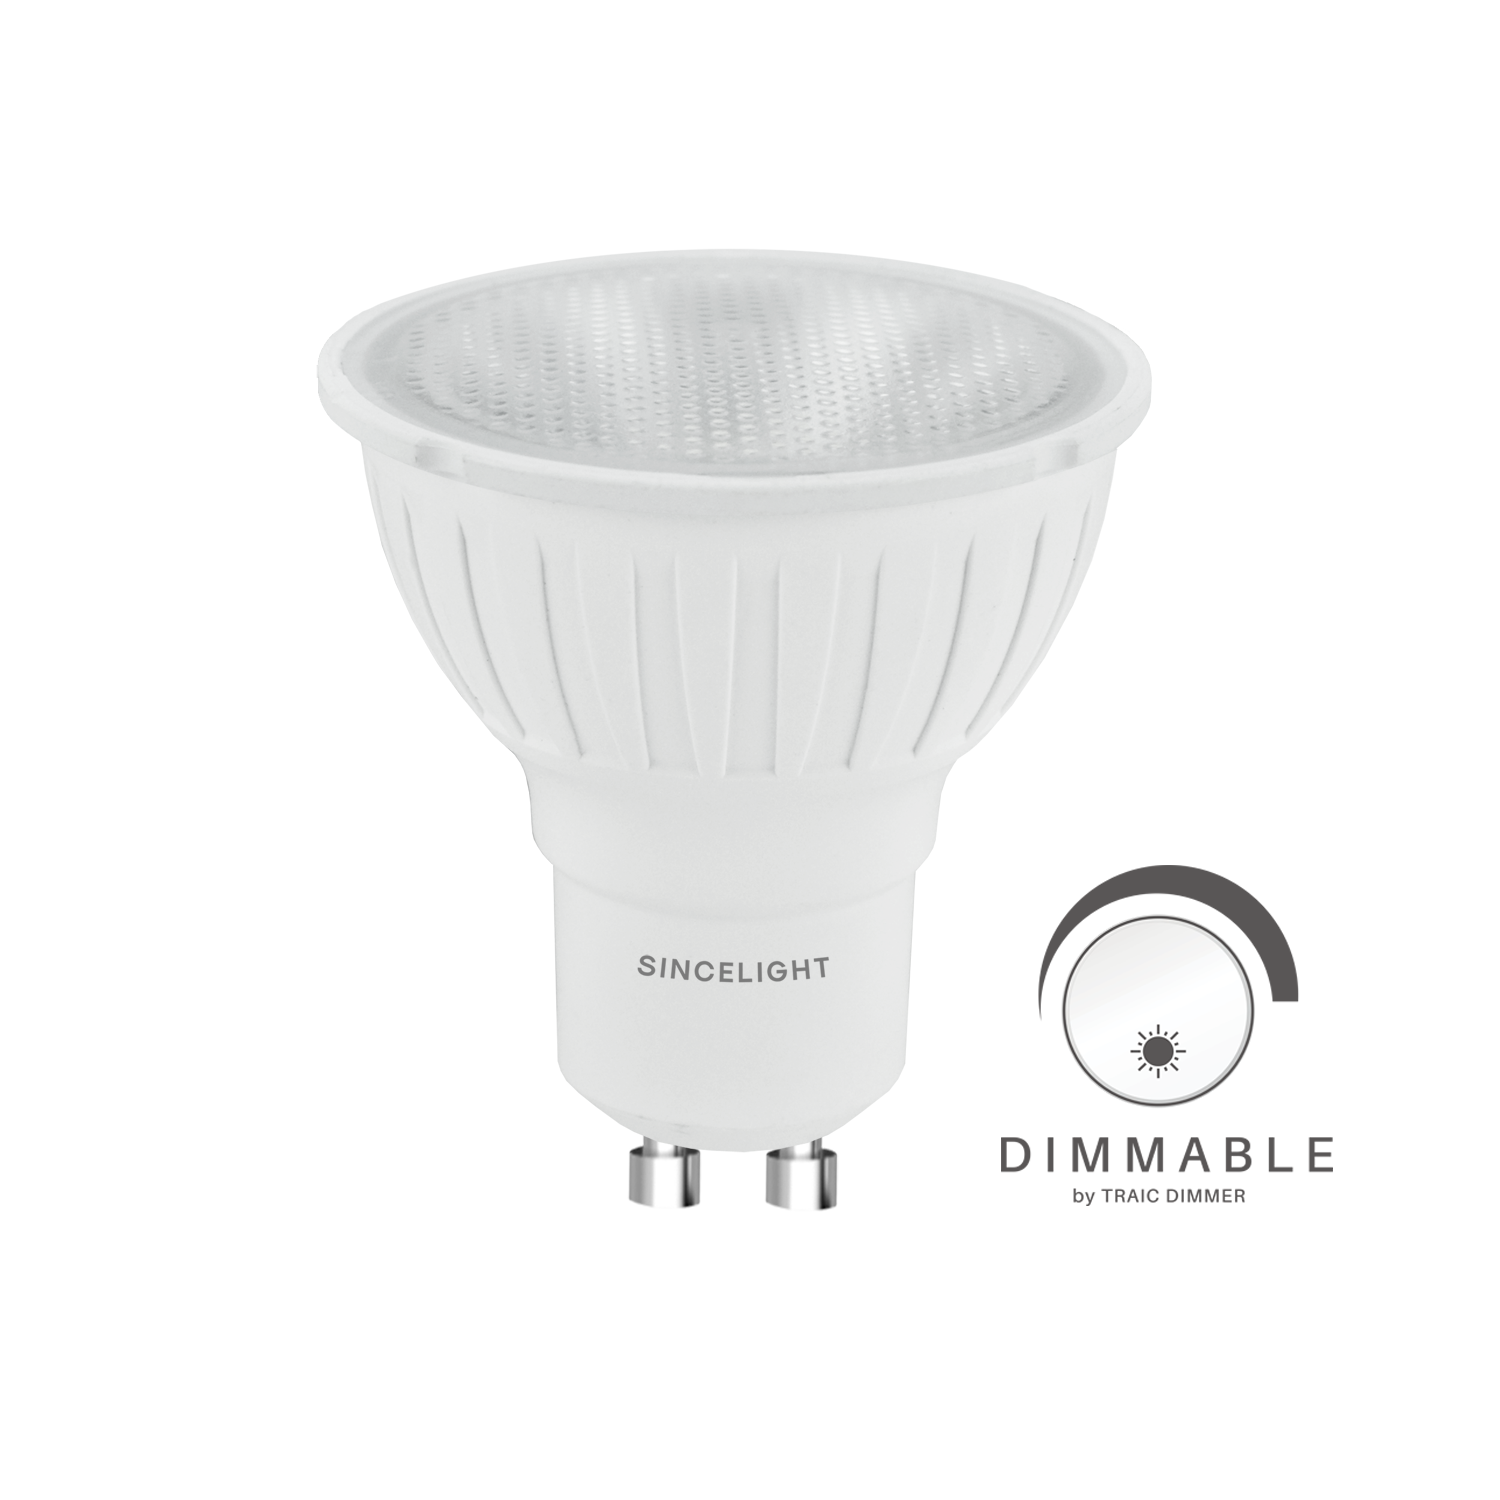 Dimmable 6W GU10 LED Reflector Bulb with ∠38° Beam Angle